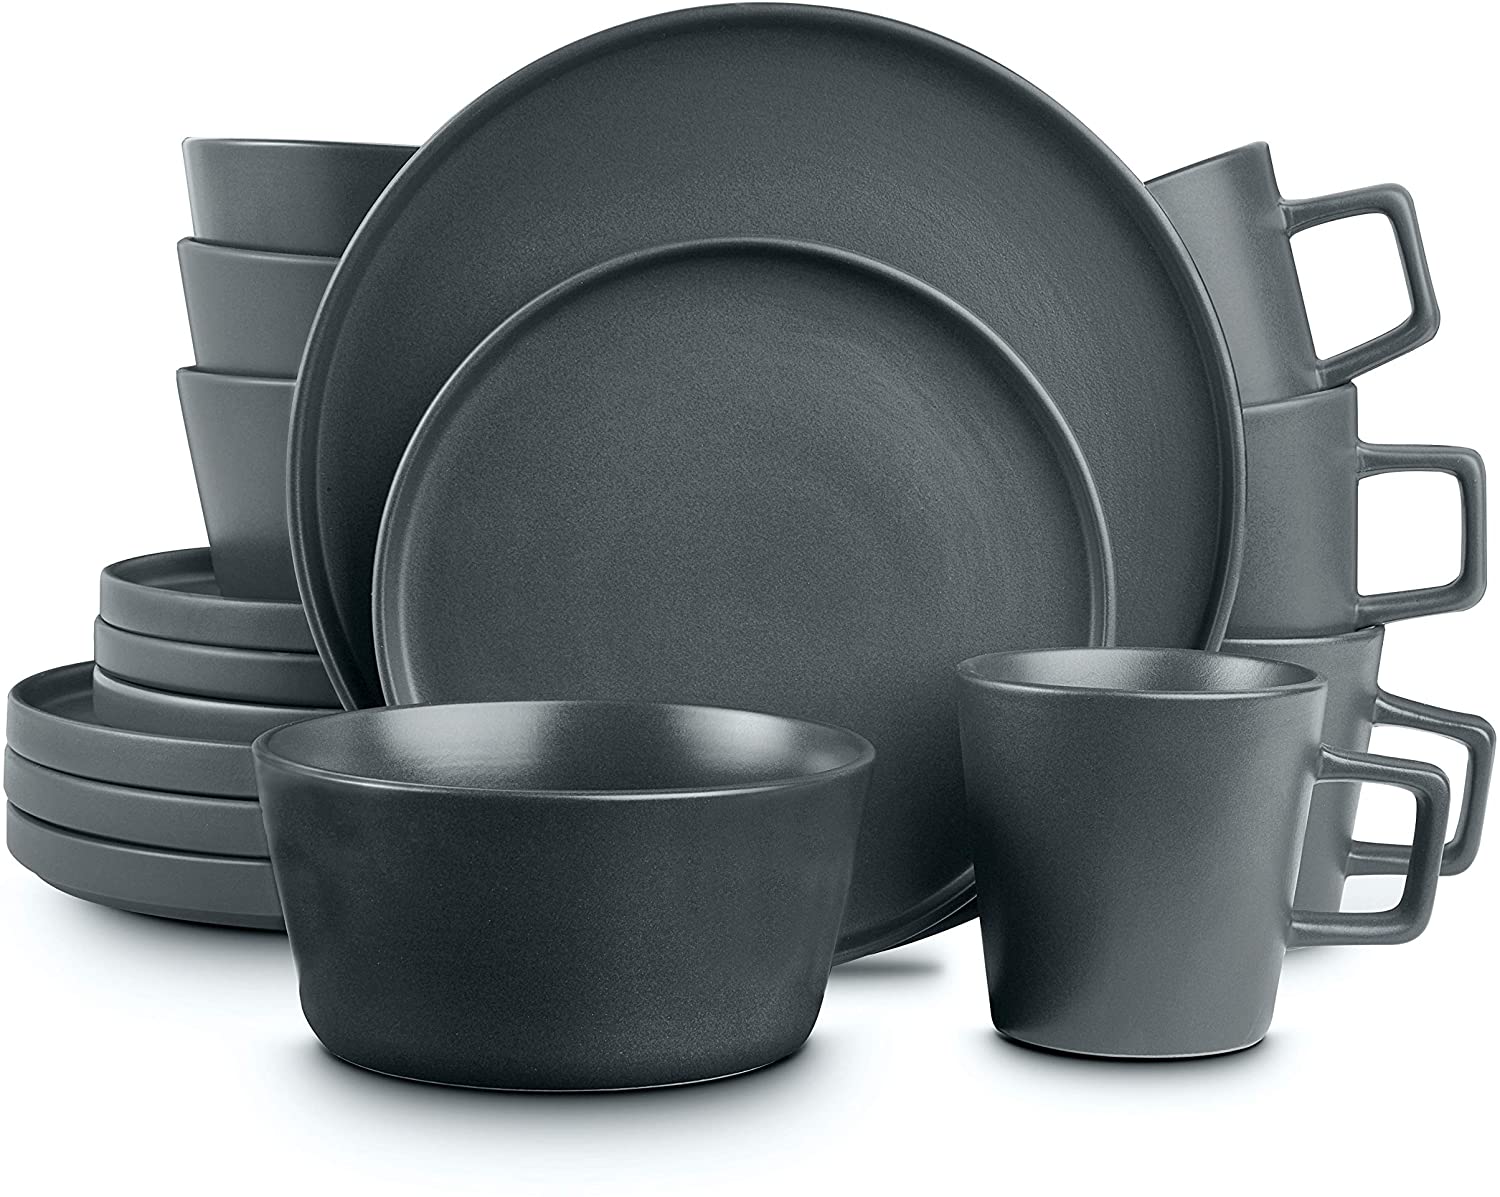 Stone Lain Coupe Everyday Dinnerware Set For Everyday Use